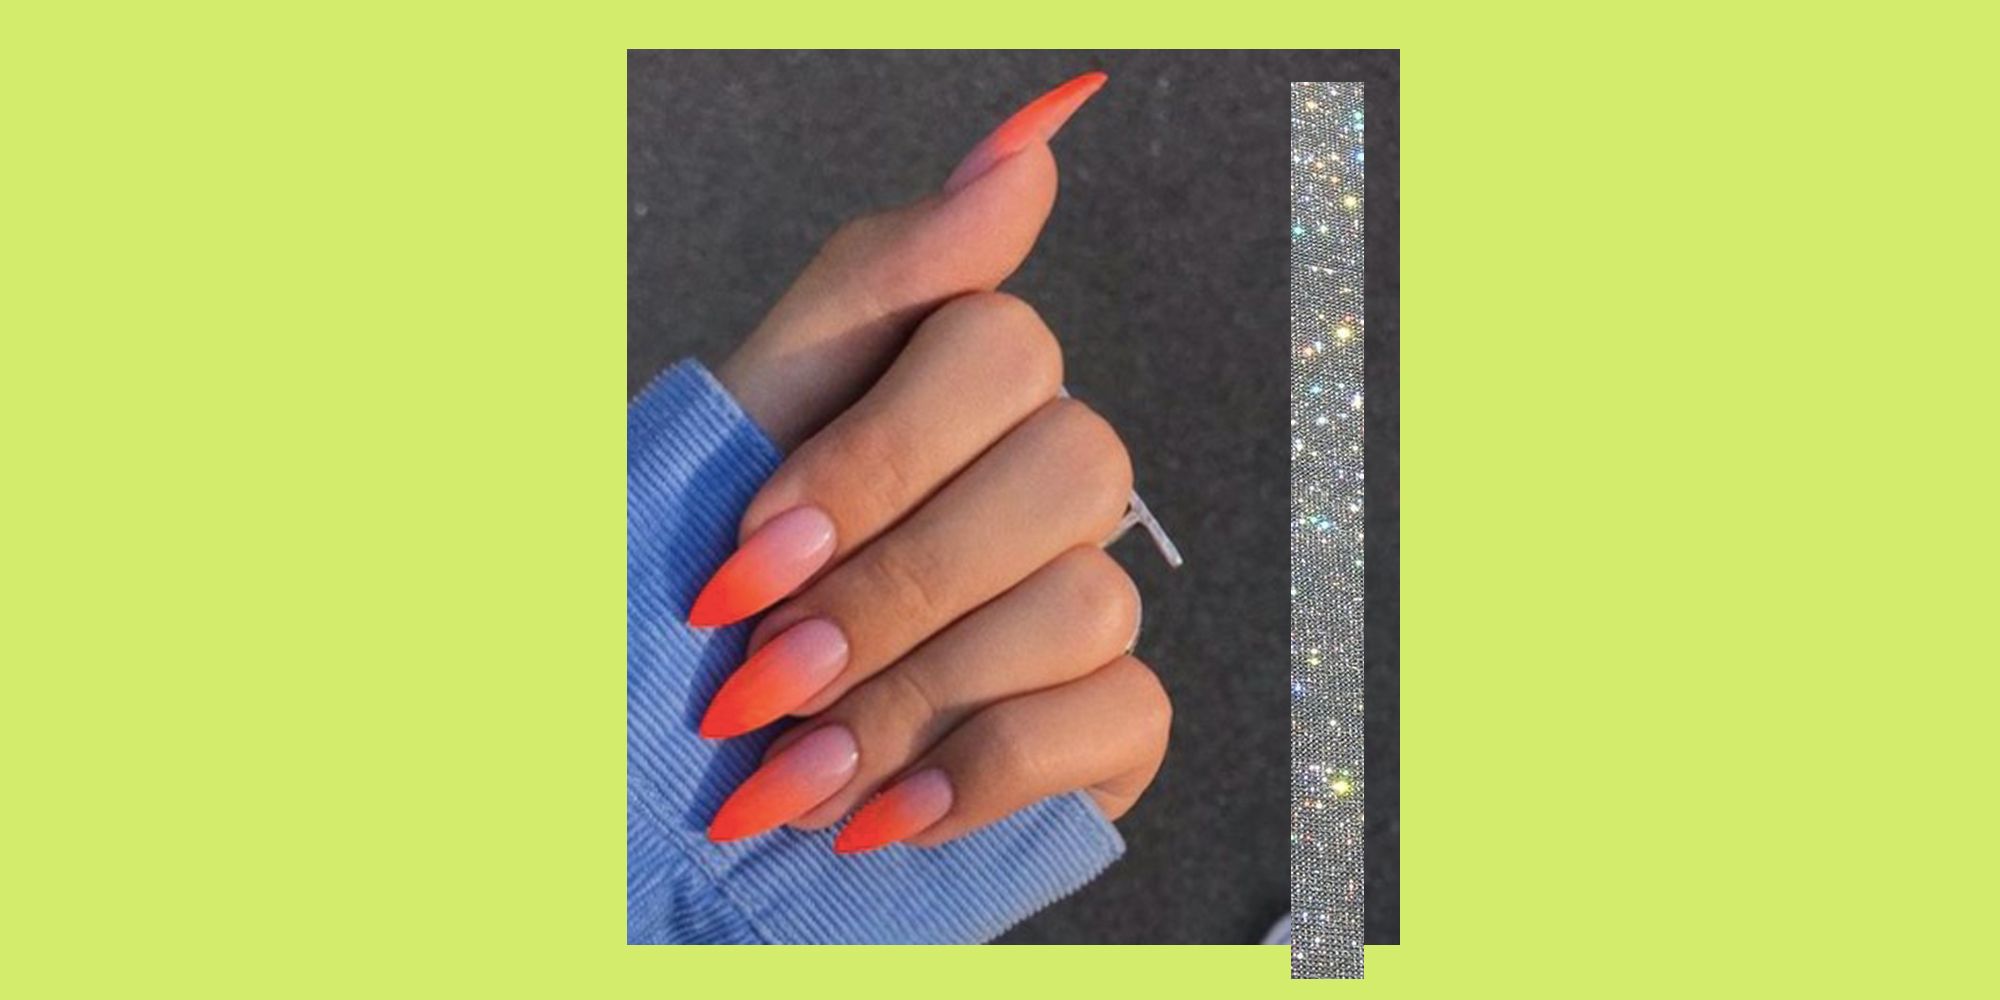 It's a ☀️ day out! Perfect for some bright nails 💚 #brightnails #notd  #mani #neongreennails #neongreen #greennails #ctnailtech #mood | Instagram